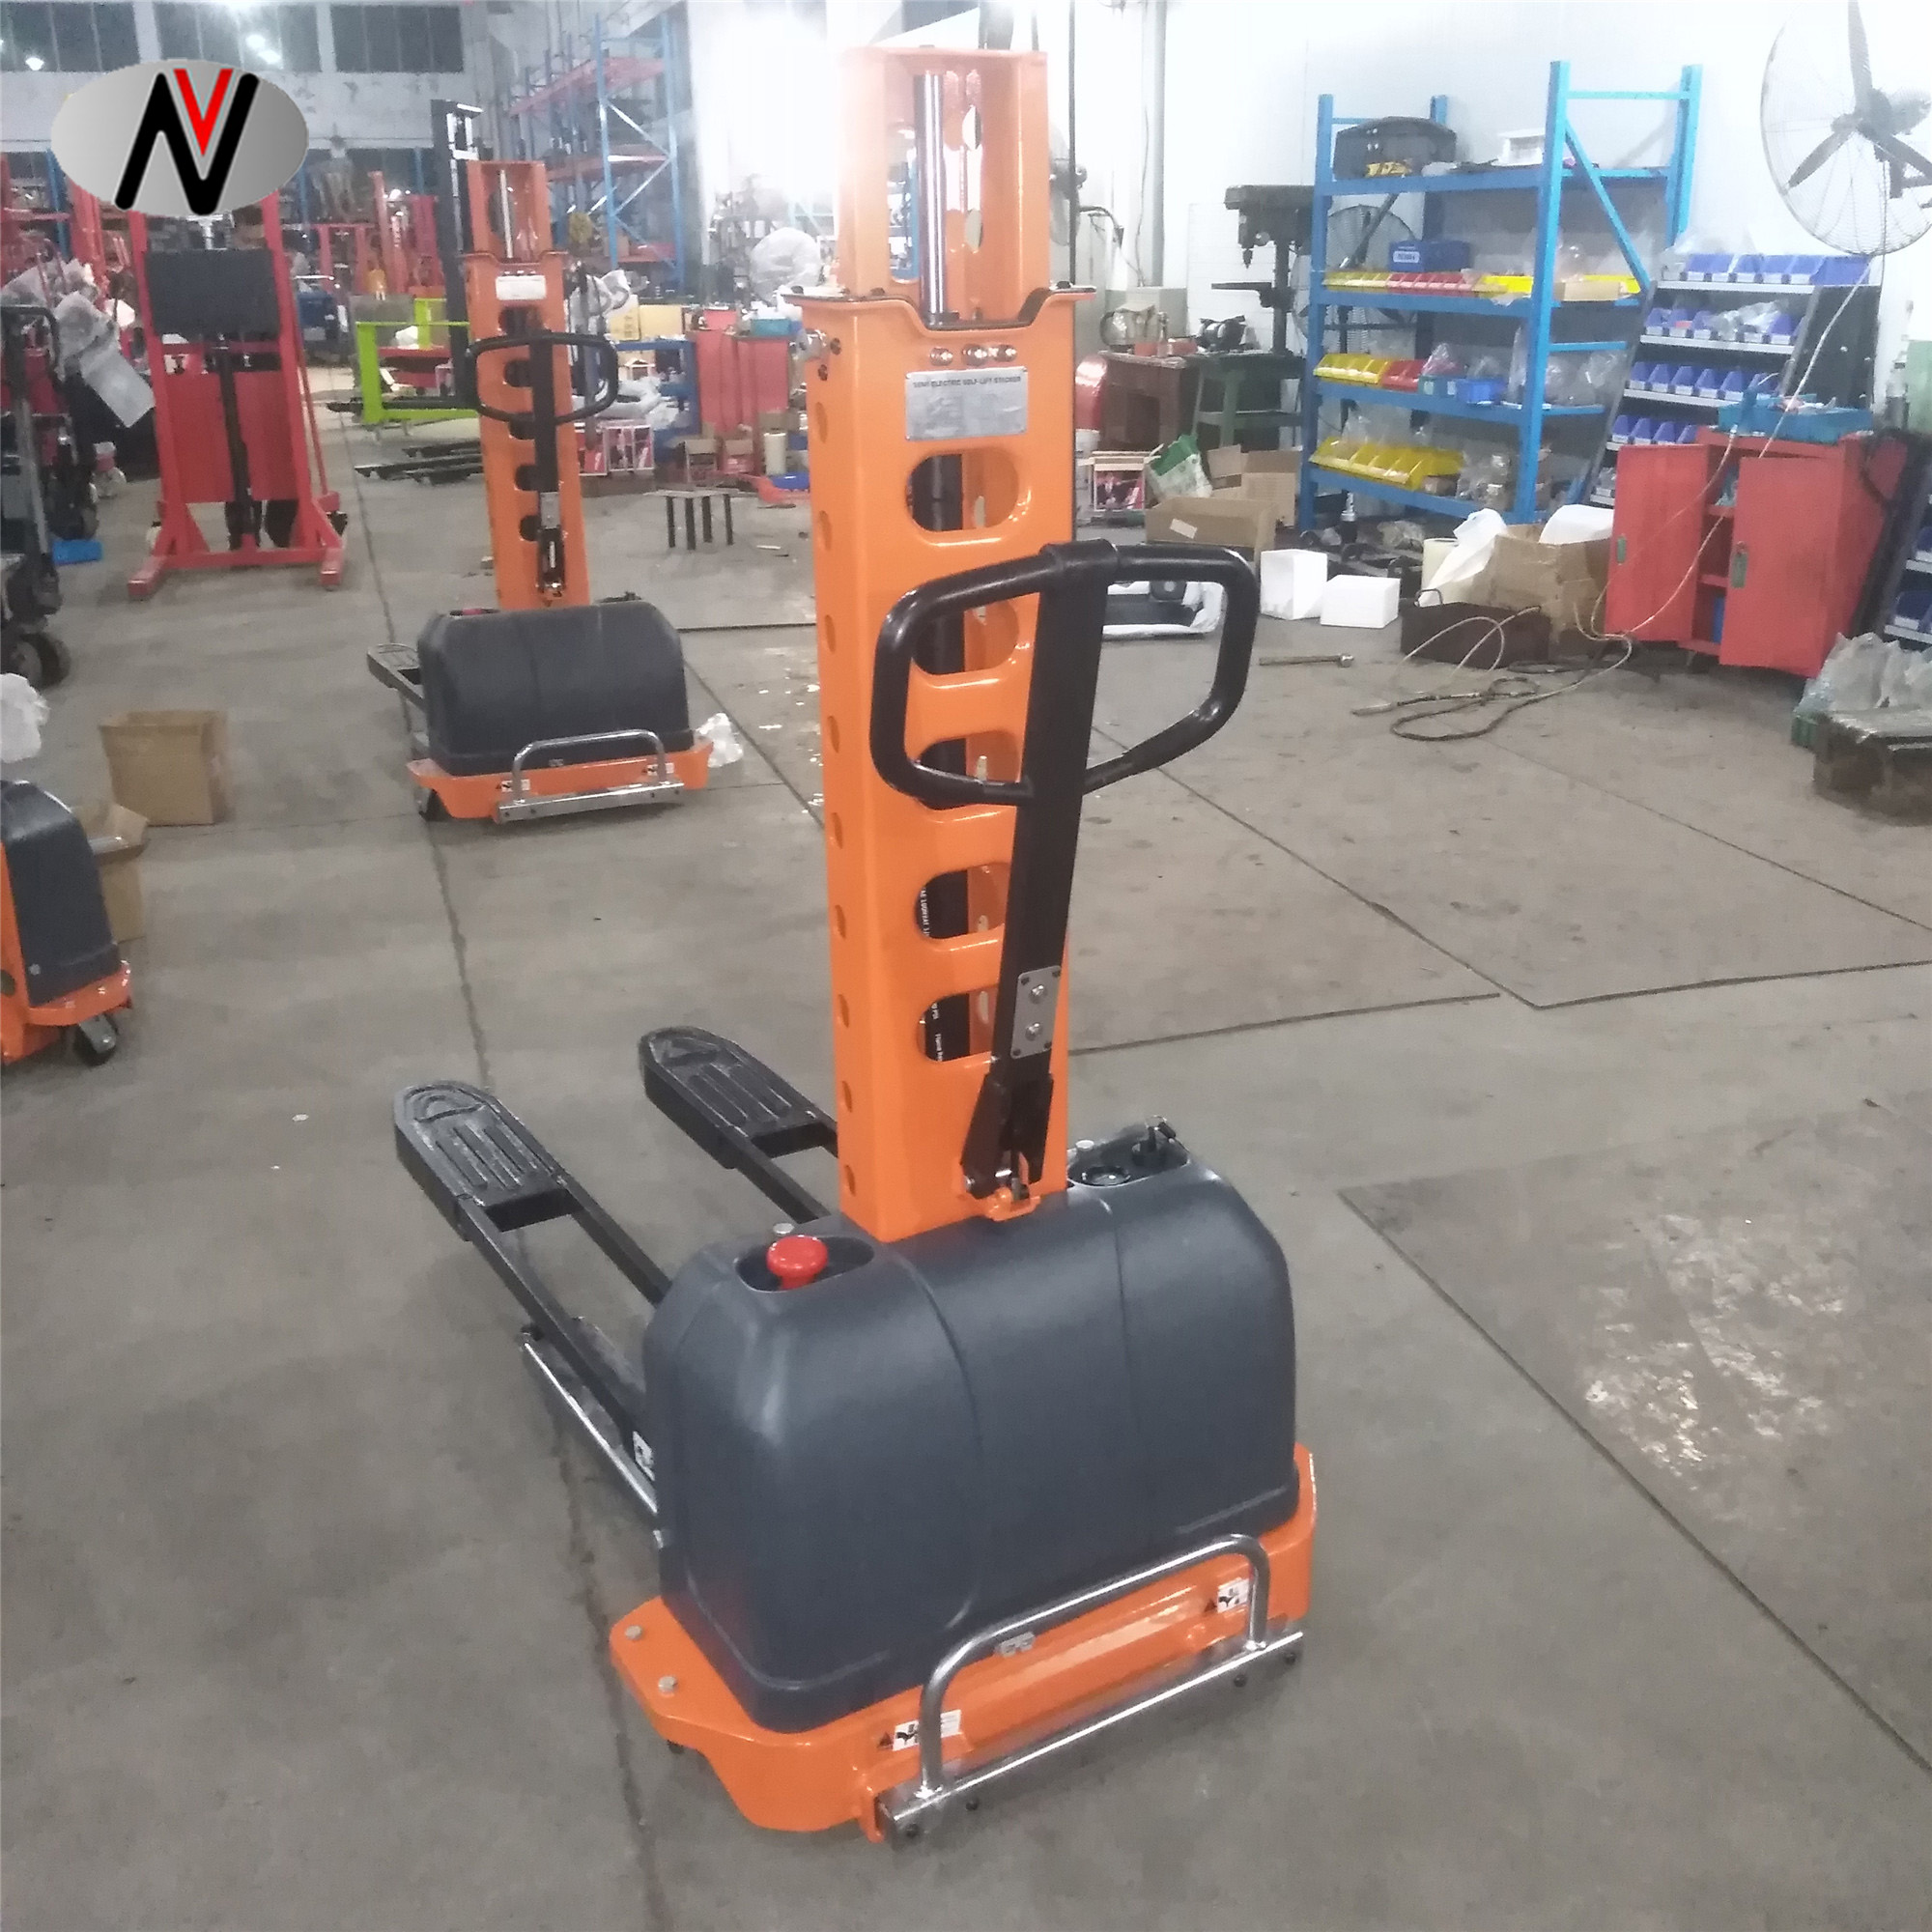 VISION Self Lifting Semi Electric Stackers Pallet Stacker 500kg Walking Type Electric Stacking Truck Forklift 700kg 1.6m Portable for Truck